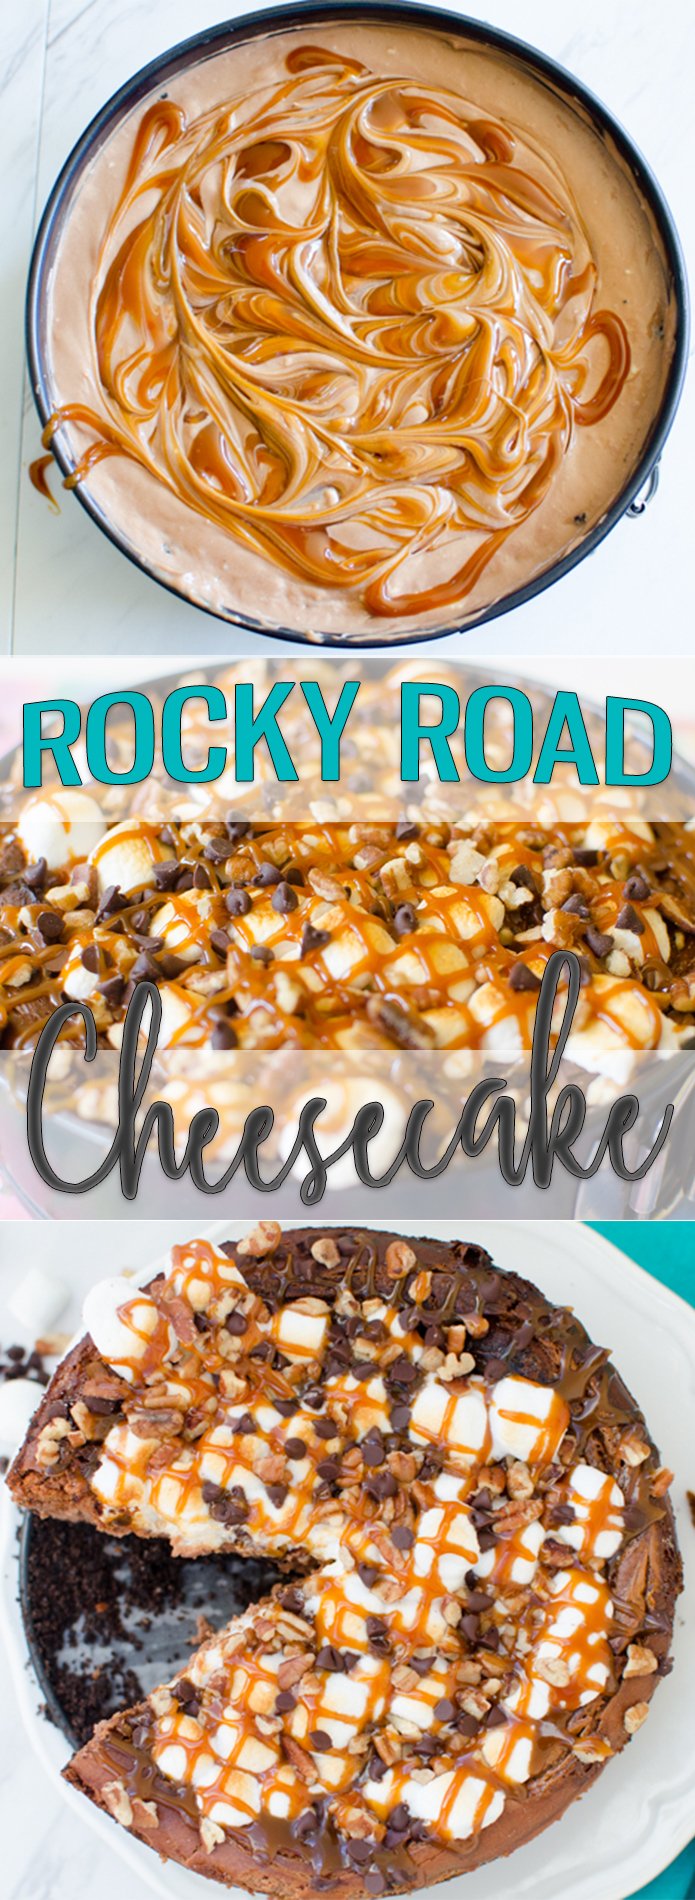 Rocky Road Cheesecake is a chocolate caramel swirl cheesecake with an Oreo crust topped with toasted marshmallows, mini chocolate chips, pecans and caramel drizzle. This impressive looking cheesecake is an extremely easy, basic recipe that is definitely beginner friendly. |Butter with a Side of Bread| #cheesecake #rockyroad #caramel #chocolate #pecans #marshmallow